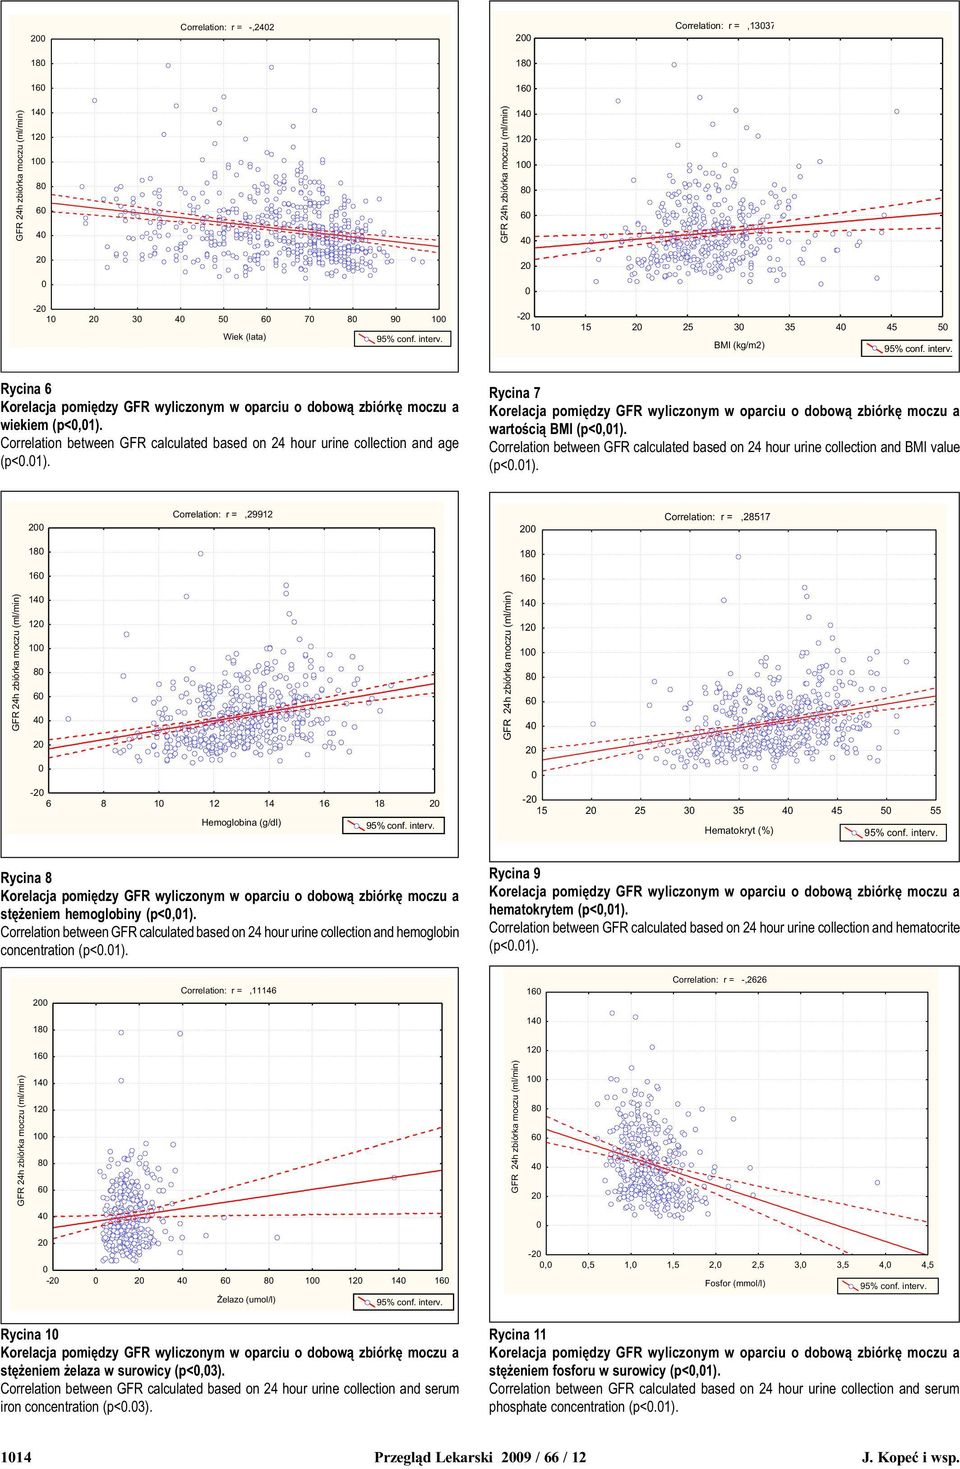 Correlation between GFR calculated based on 24 hour urine collection and BMI value (p<.1).